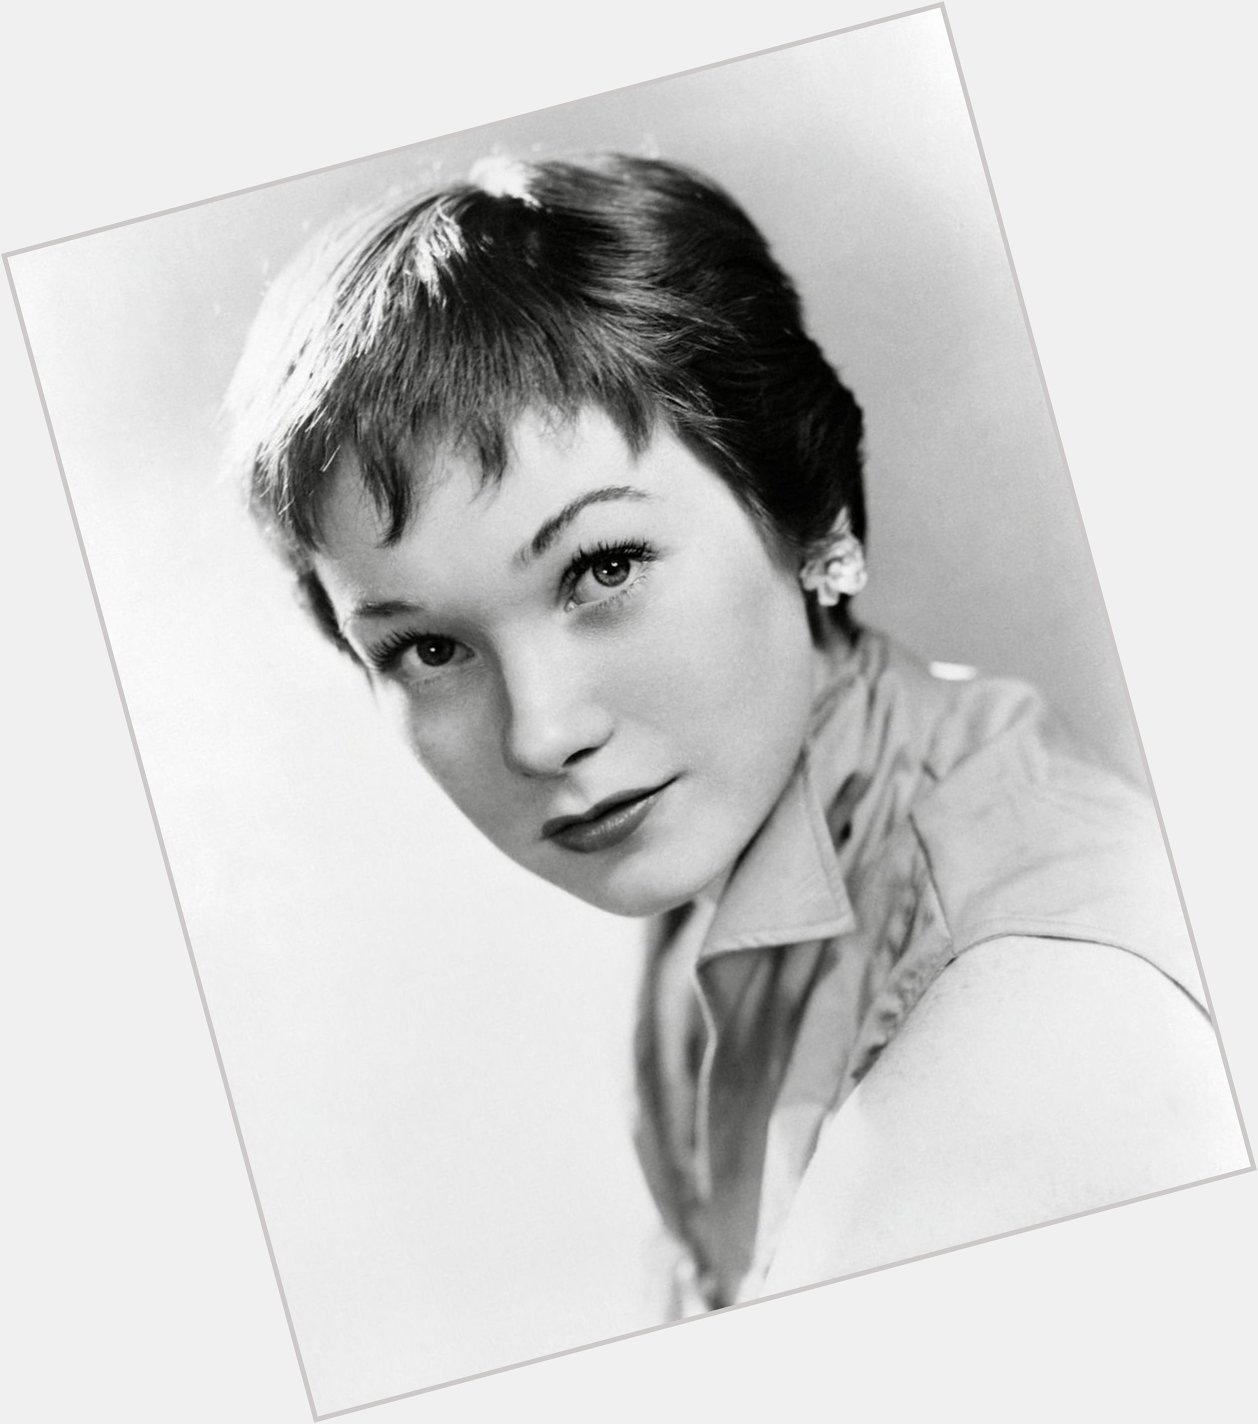 Happy 87th birthday to Shirley MacLaine, a pixie cut queen and a great actress. 